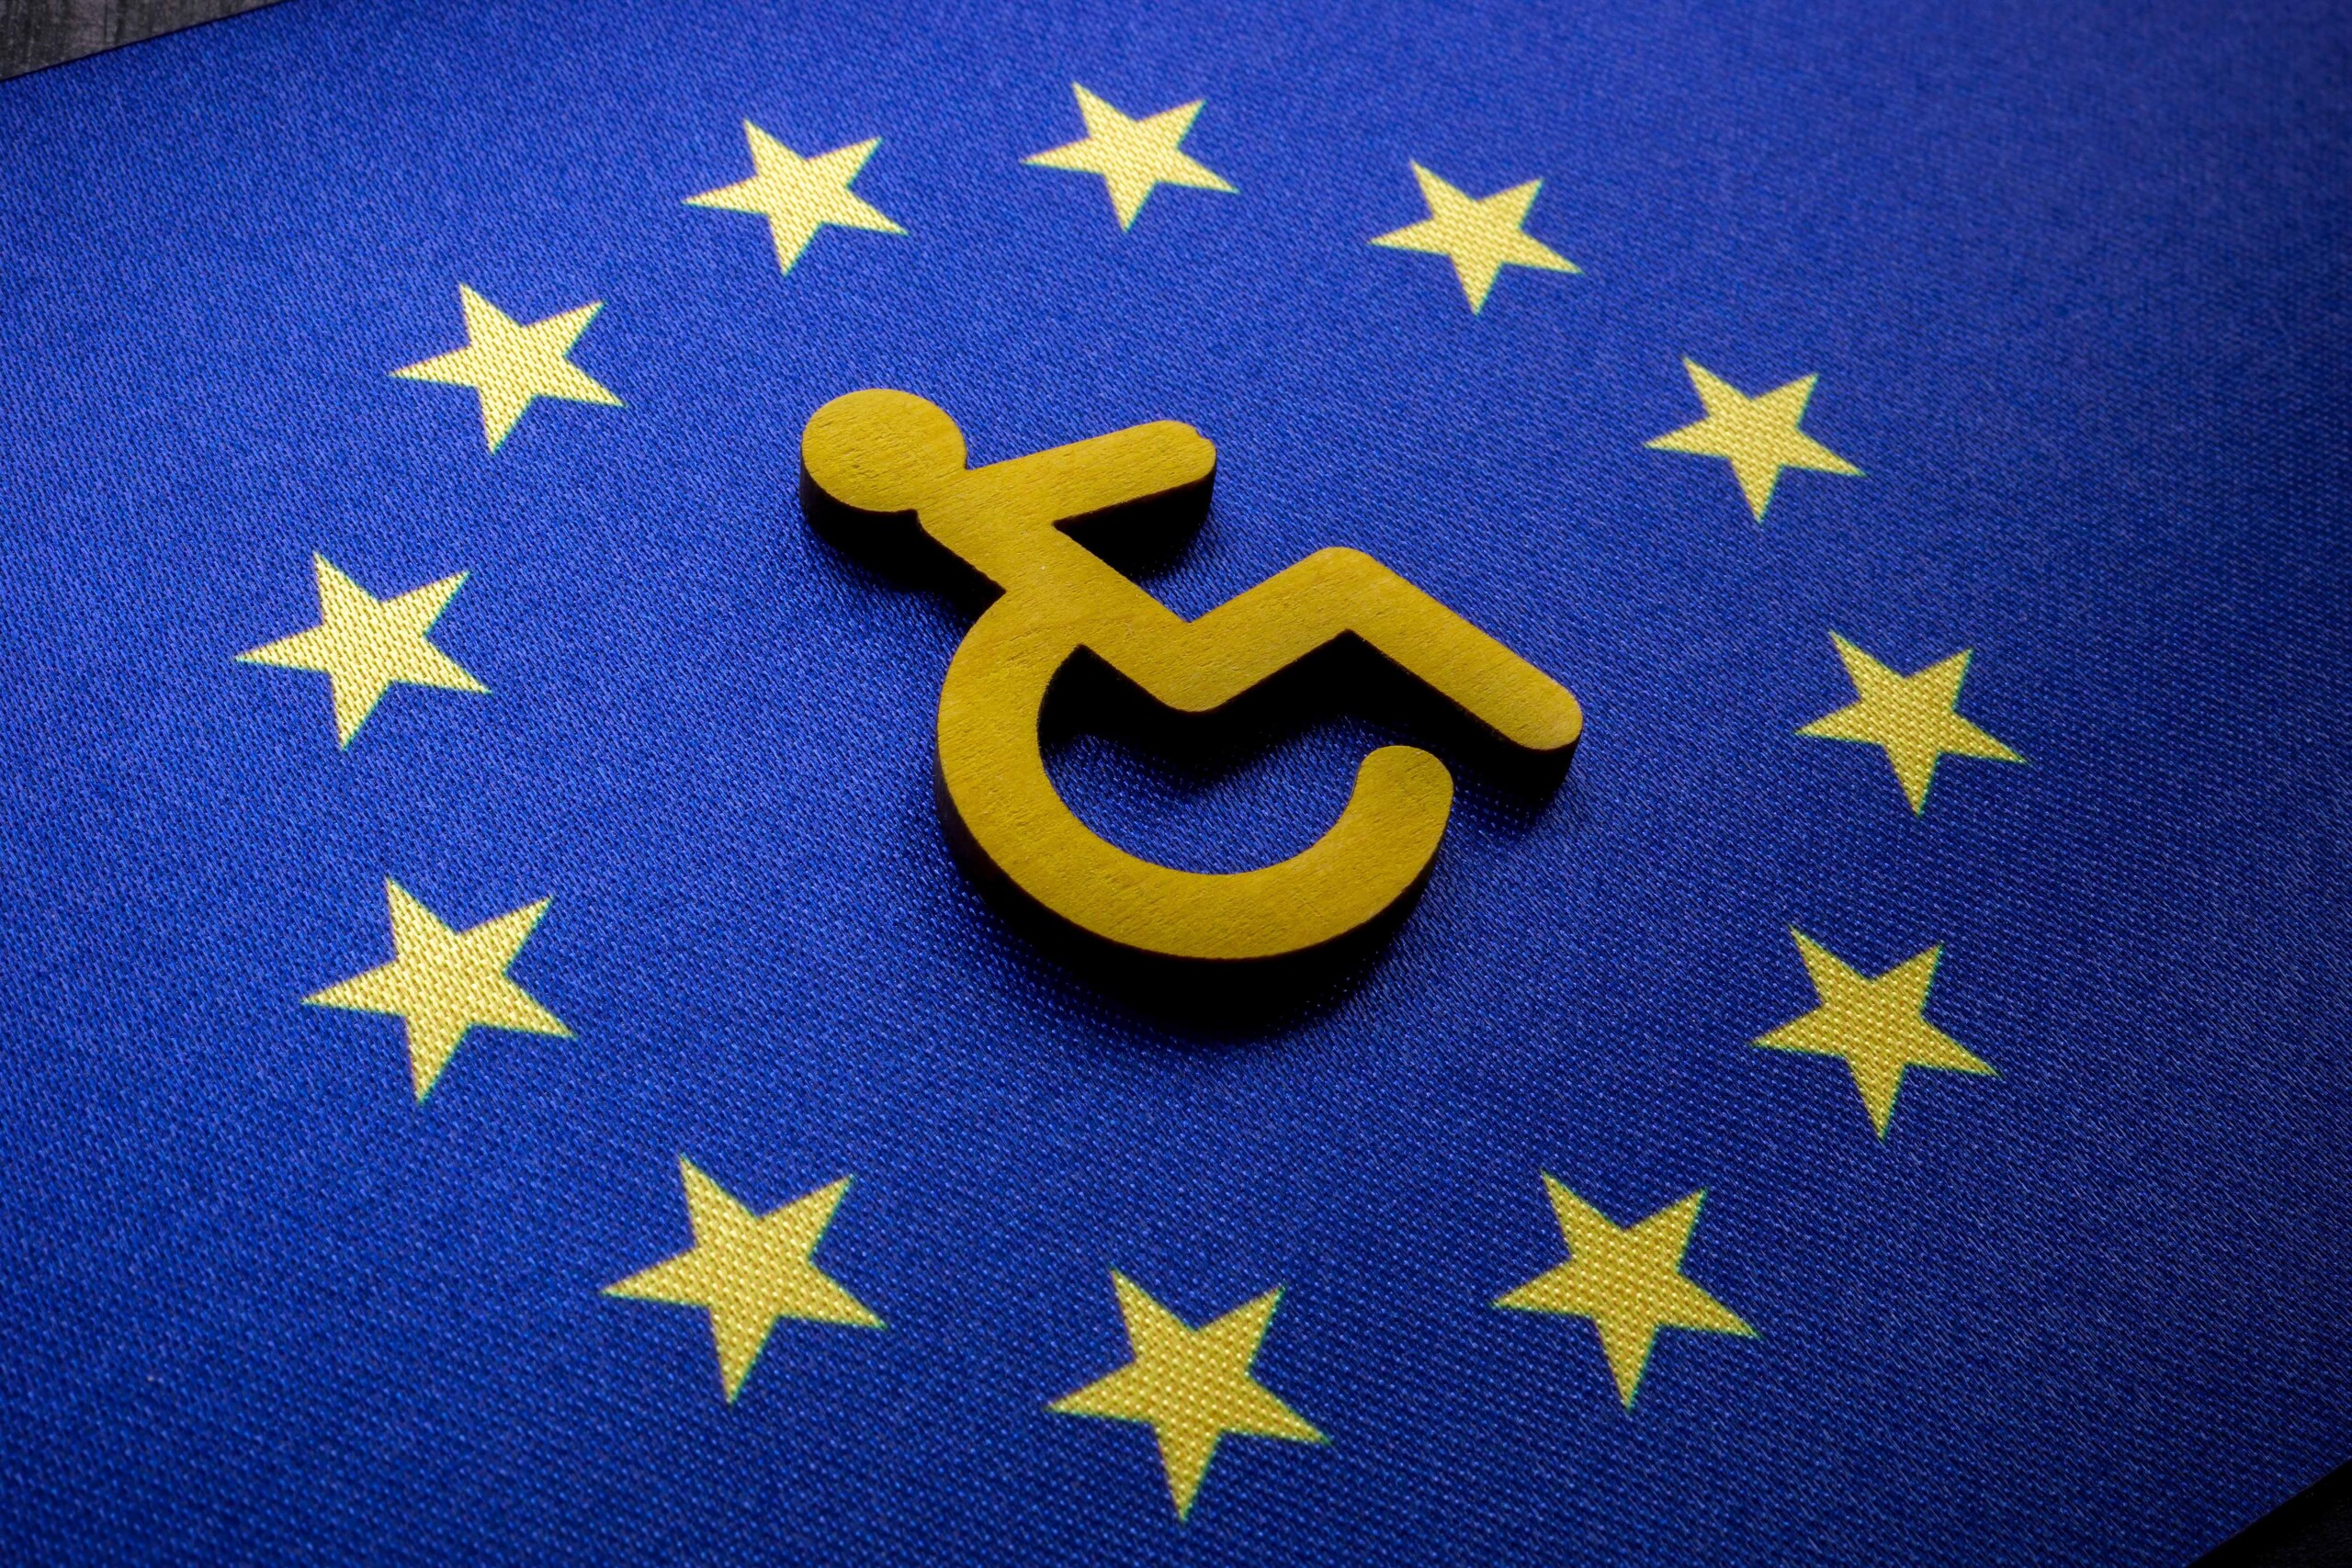 The European flag, with the International Symbol of Access in the middle